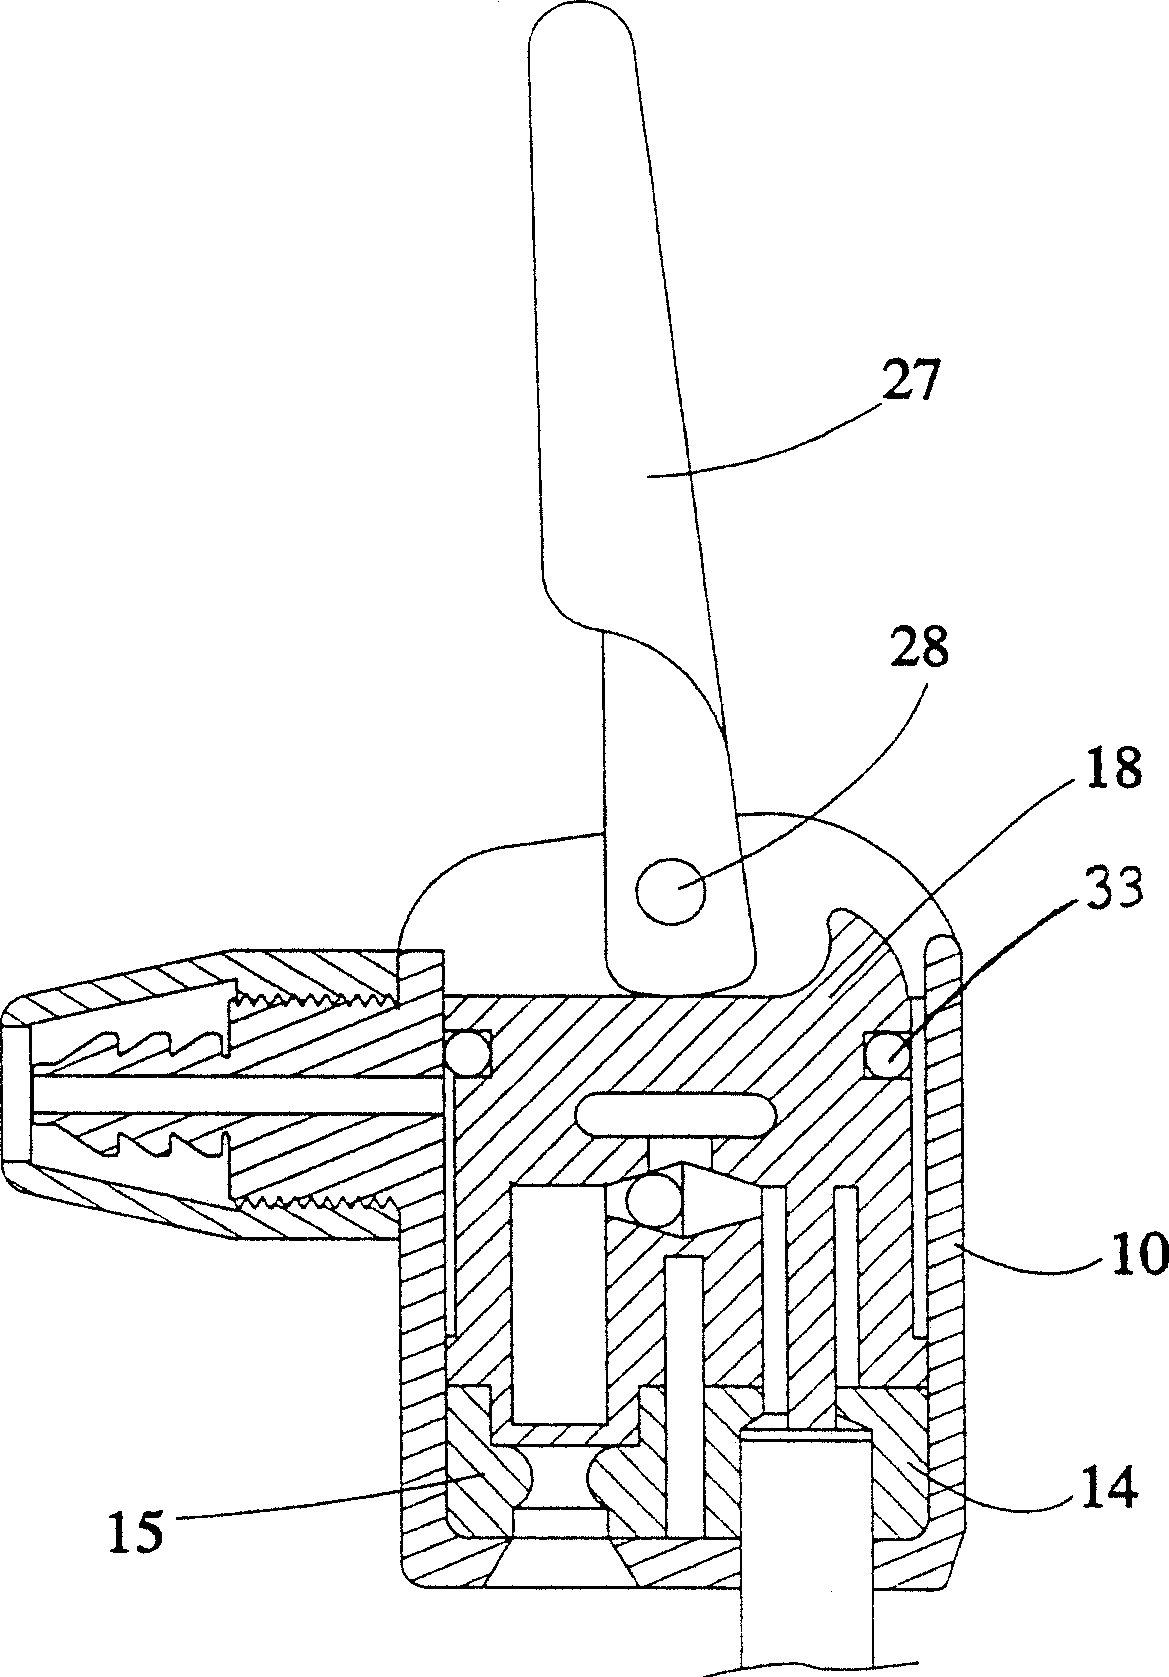 Air-valve joint of air-inflating device